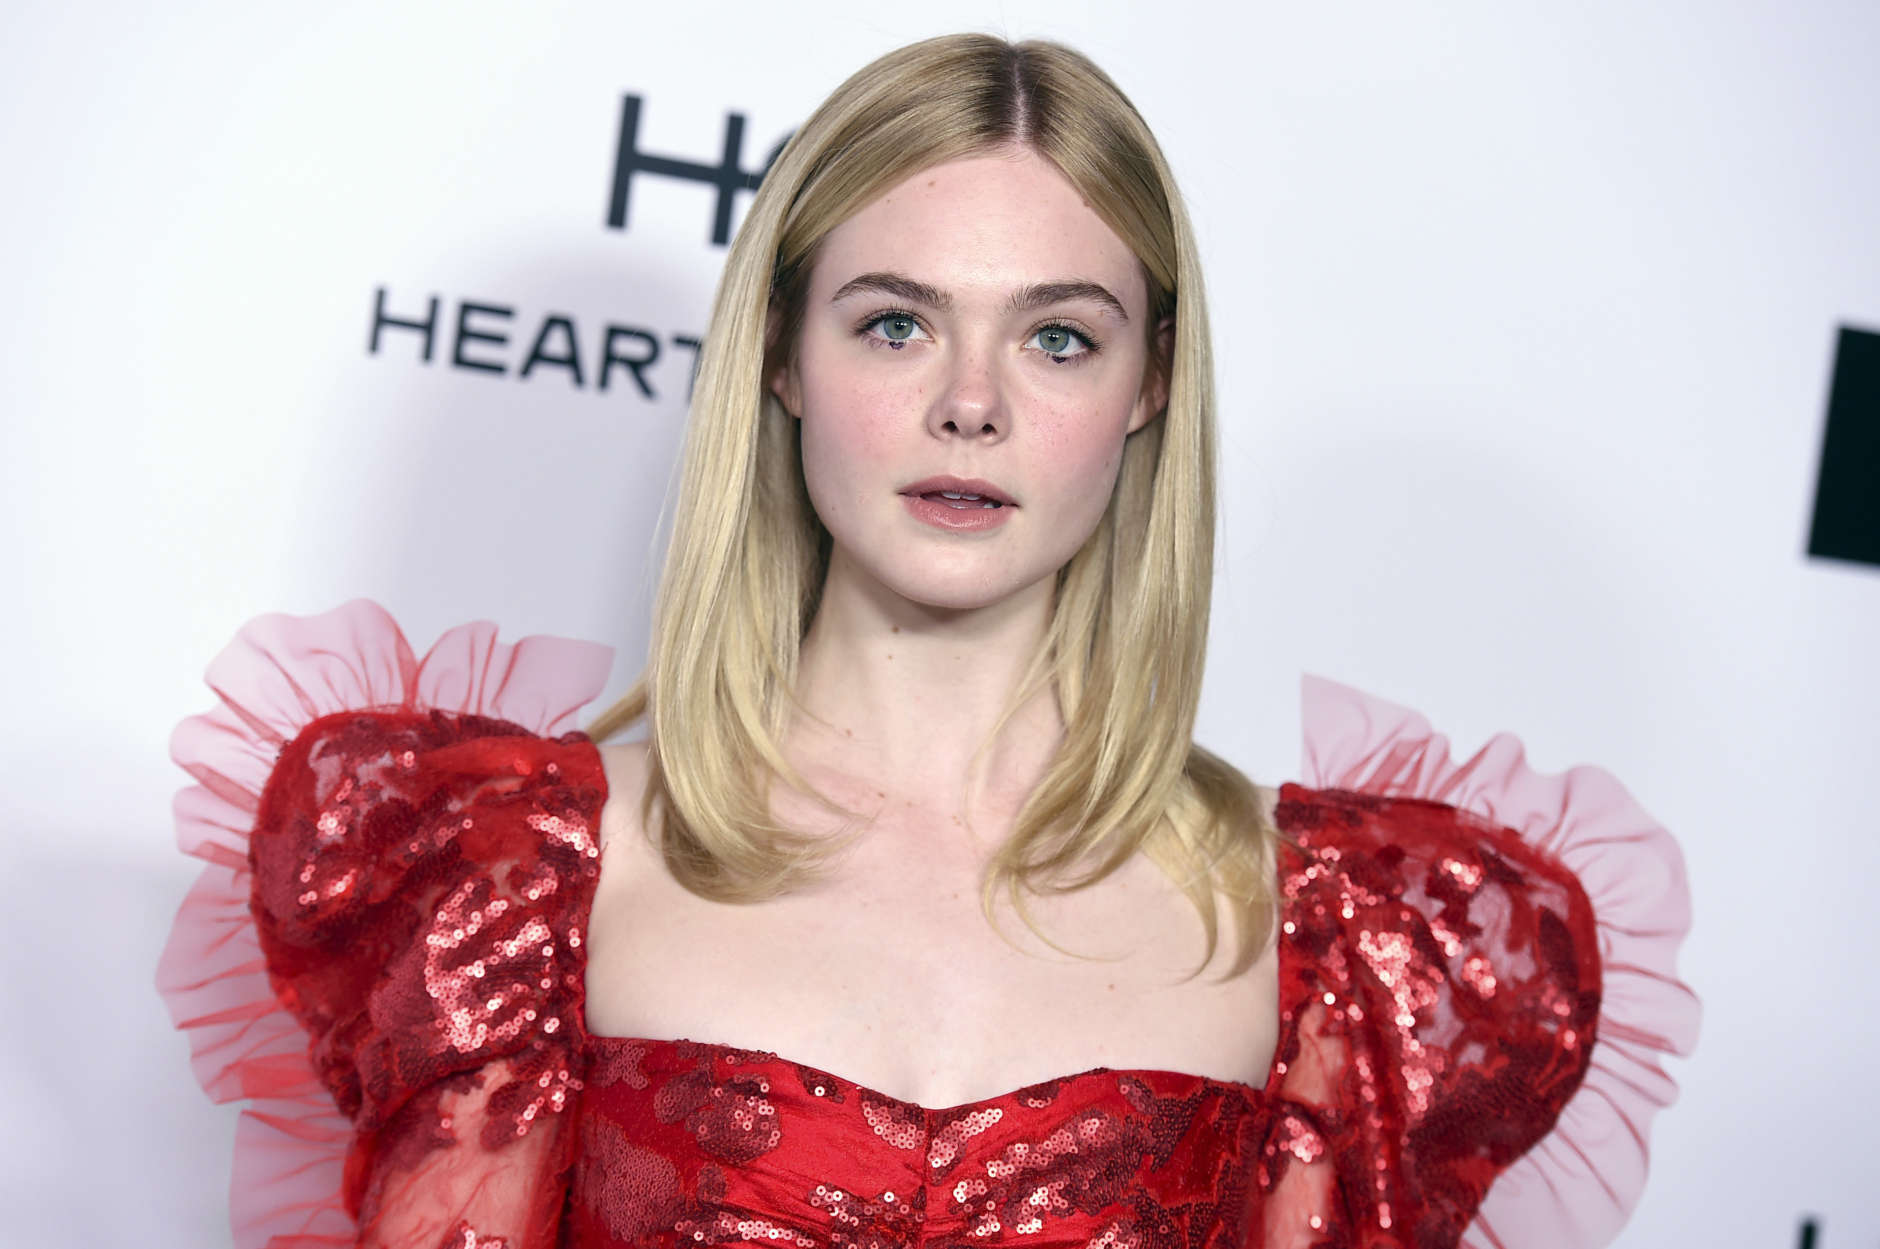 Actress Elle Fanning (''Because of Winn-Dixie'') is 19 on April 9. 

Here, Elle Fanning arrives at Harper's BAZAAR's 150 Most Fashionable Women at the Sunset Tower Hotel on Friday, Jan. 27, 2017, in Los Angeles. (Photo by Jordan Strauss/Invision/AP)